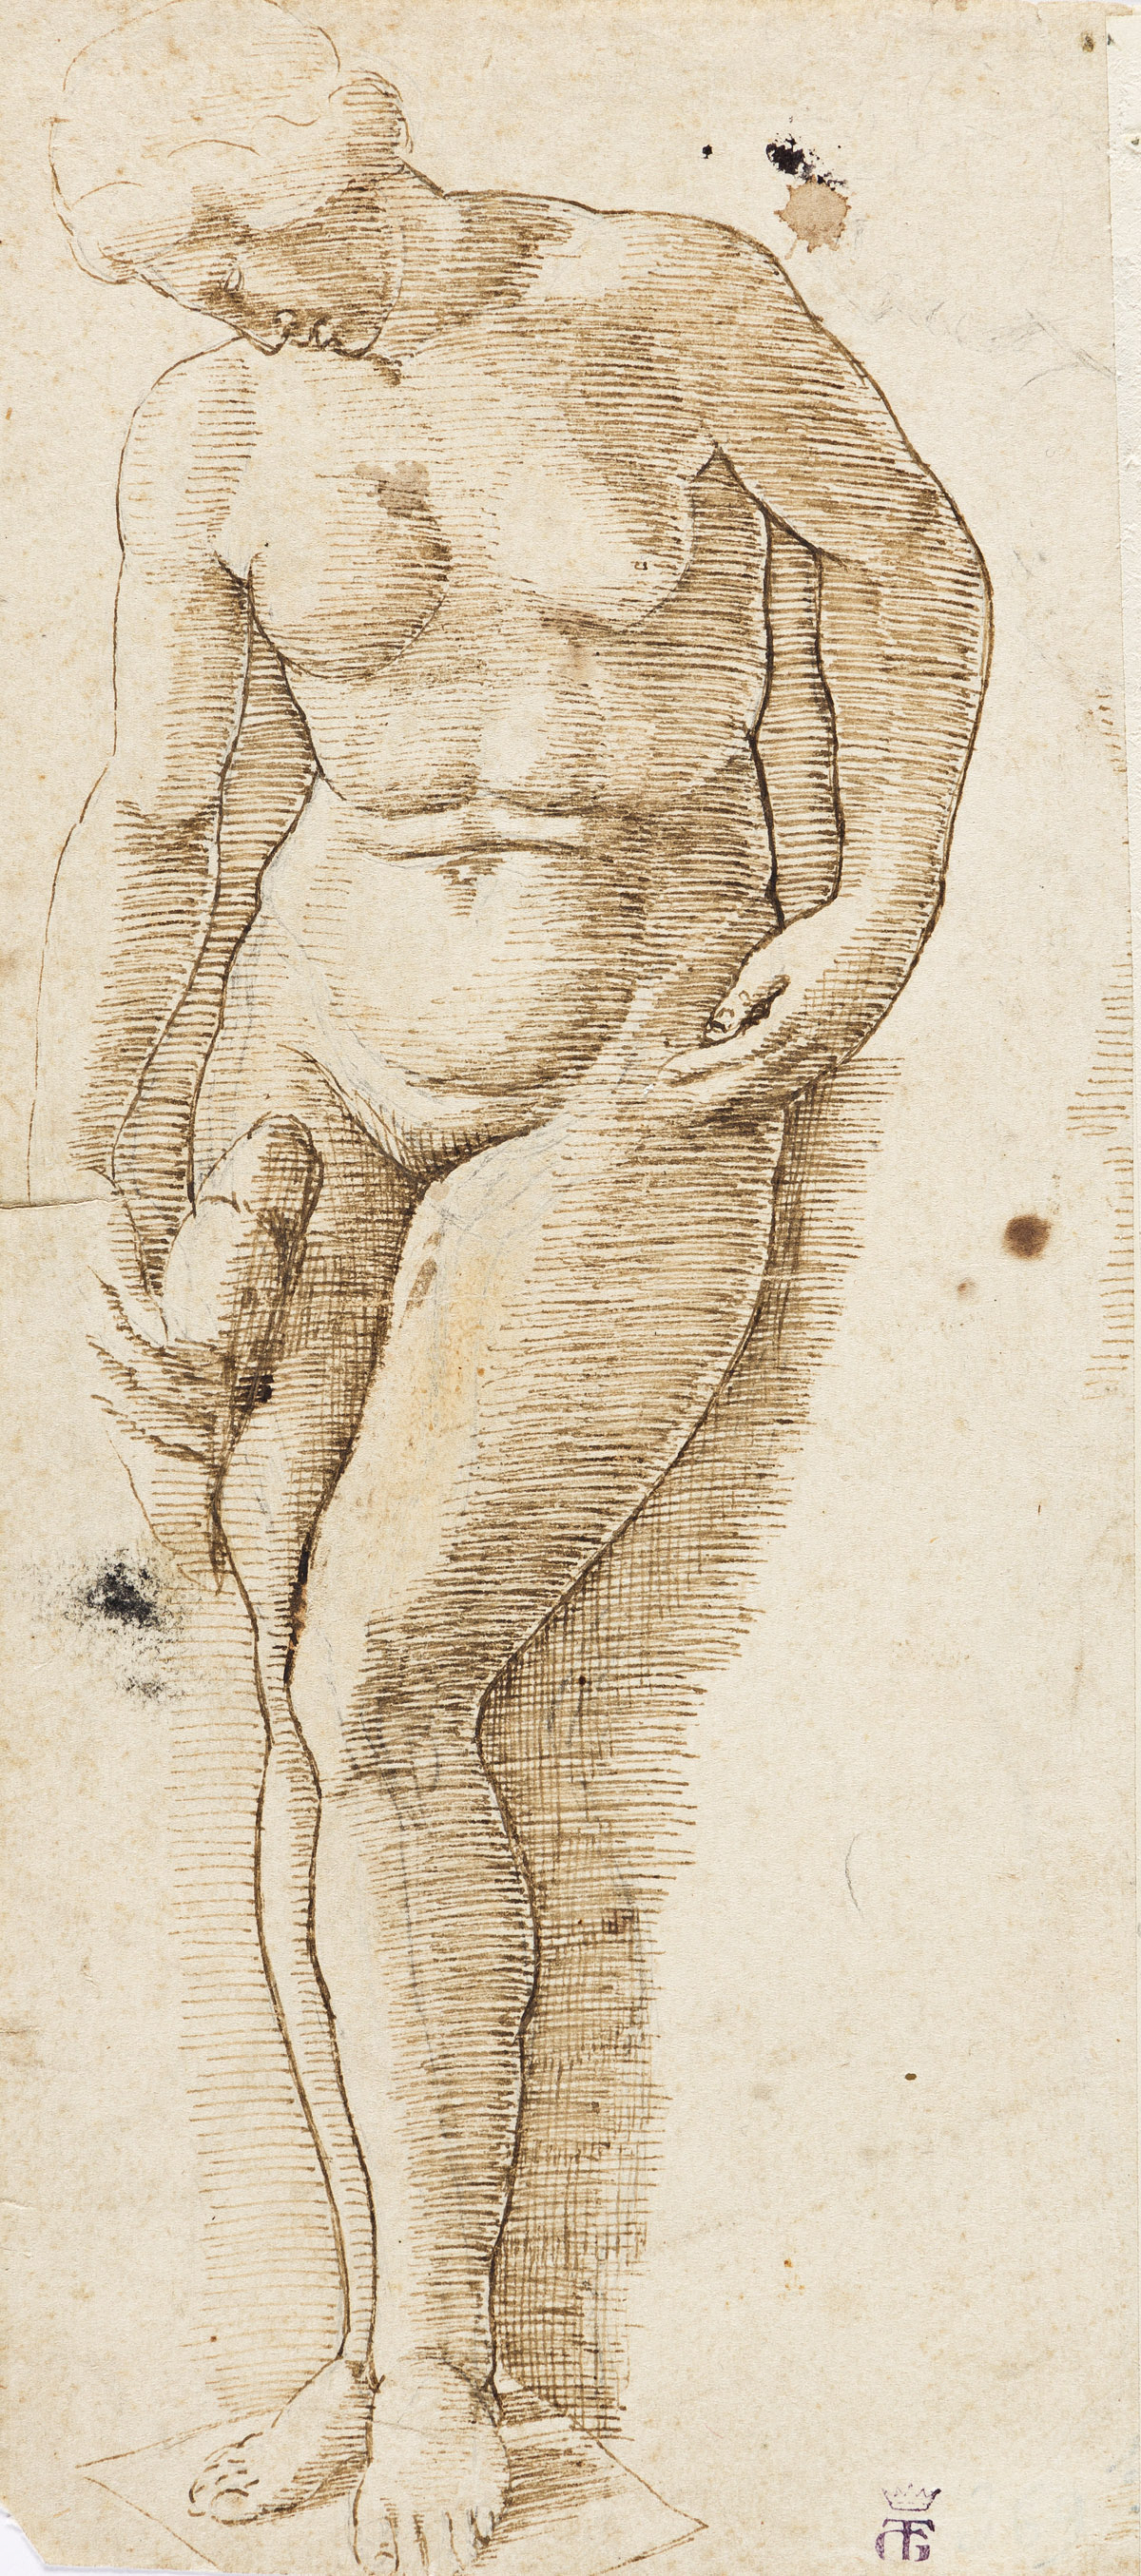 BERNARDO PARENTINO (ATTRIBUTED TO) (Porec 1450-1500 Vicenza) Study of a Standing Male Nude * Study of a Standing Female Nude.